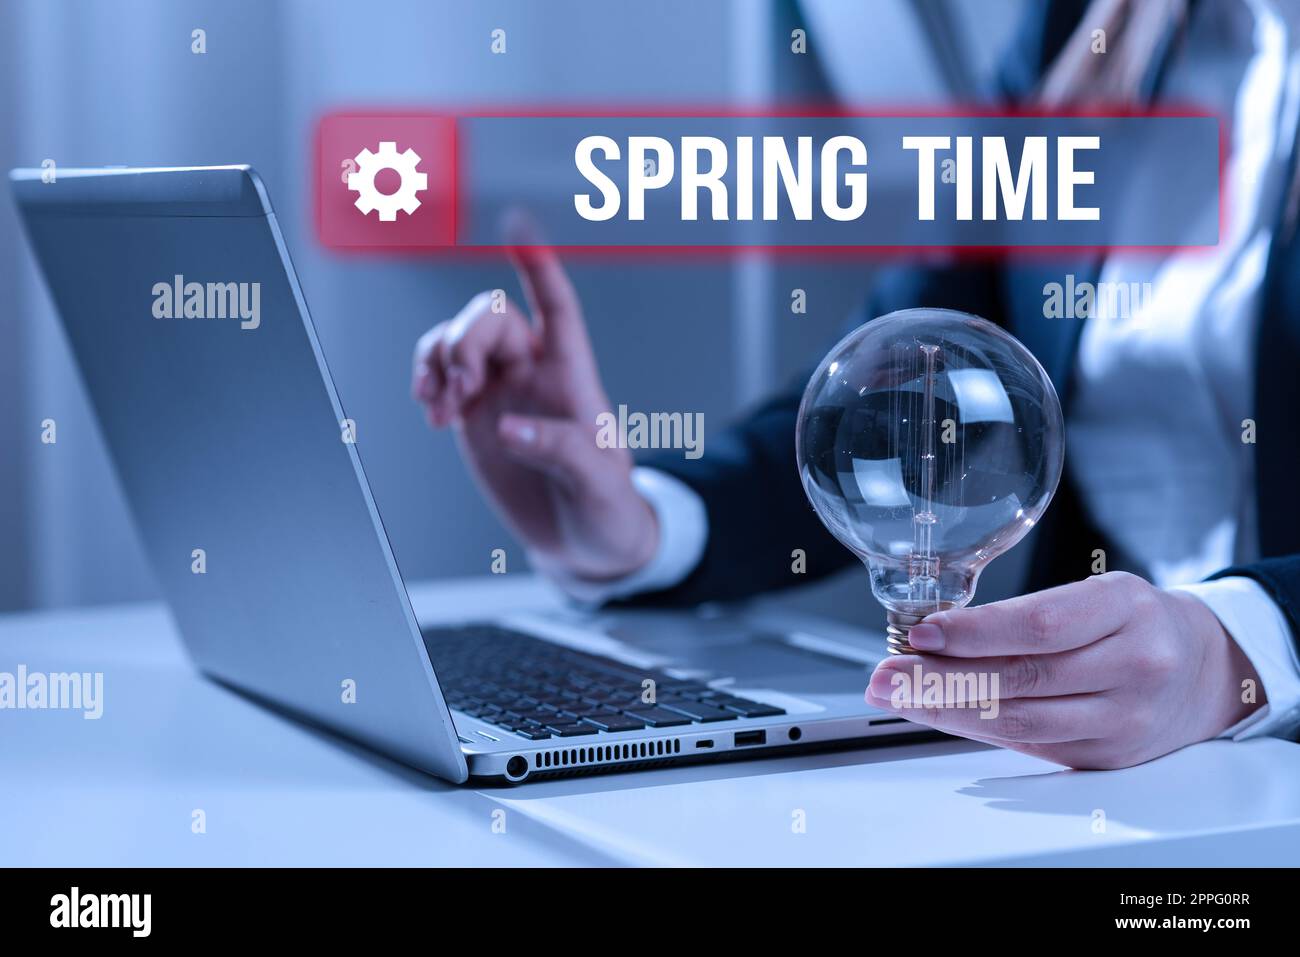 Conceptual caption Spring Time, Business showcase temperate season of the year identified by a revival of plants Stock Photo